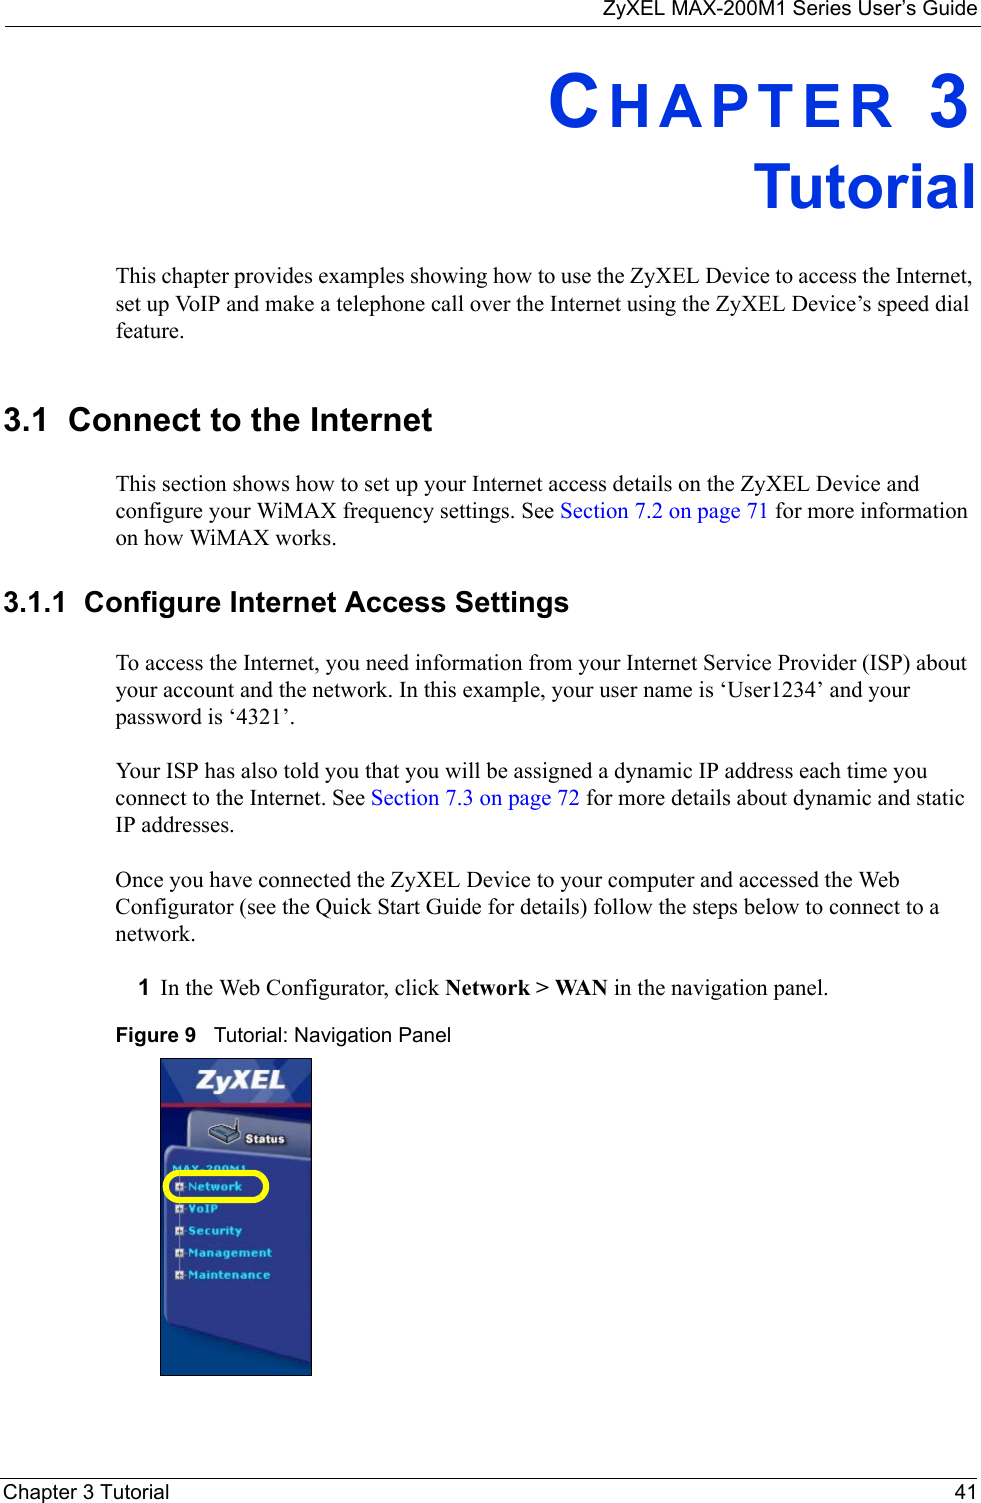 ZyXEL MAX-200M1 Series User’s GuideChapter 3 Tutorial 41CHAPTER 3TutorialThis chapter provides examples showing how to use the ZyXEL Device to access the Internet, set up VoIP and make a telephone call over the Internet using the ZyXEL Device’s speed dial feature. 3.1  Connect to the InternetThis section shows how to set up your Internet access details on the ZyXEL Device and configure your WiMAX frequency settings. See Section 7.2 on page 71 for more information on how WiMAX works.3.1.1  Configure Internet Access SettingsTo access the Internet, you need information from your Internet Service Provider (ISP) about your account and the network. In this example, your user name is ‘User1234’ and your password is ‘4321’. Your ISP has also told you that you will be assigned a dynamic IP address each time you connect to the Internet. See Section 7.3 on page 72 for more details about dynamic and static IP addresses. Once you have connected the ZyXEL Device to your computer and accessed the Web Configurator (see the Quick Start Guide for details) follow the steps below to connect to a network.1In the Web Configurator, click Network &gt; WAN in the navigation panel.Figure 9   Tutorial: Navigation Panel